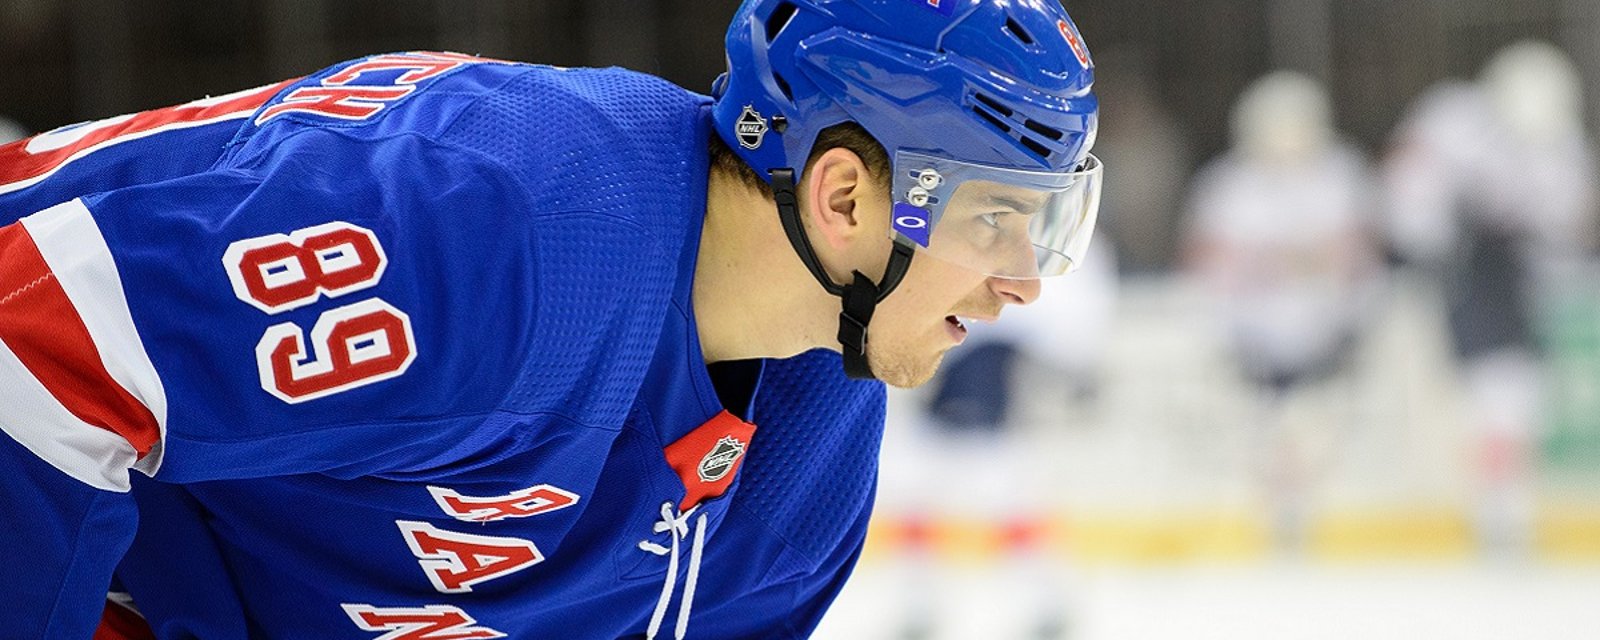 Breaking: Devastating news for the Rangers and forward Pavel Buchnevich.